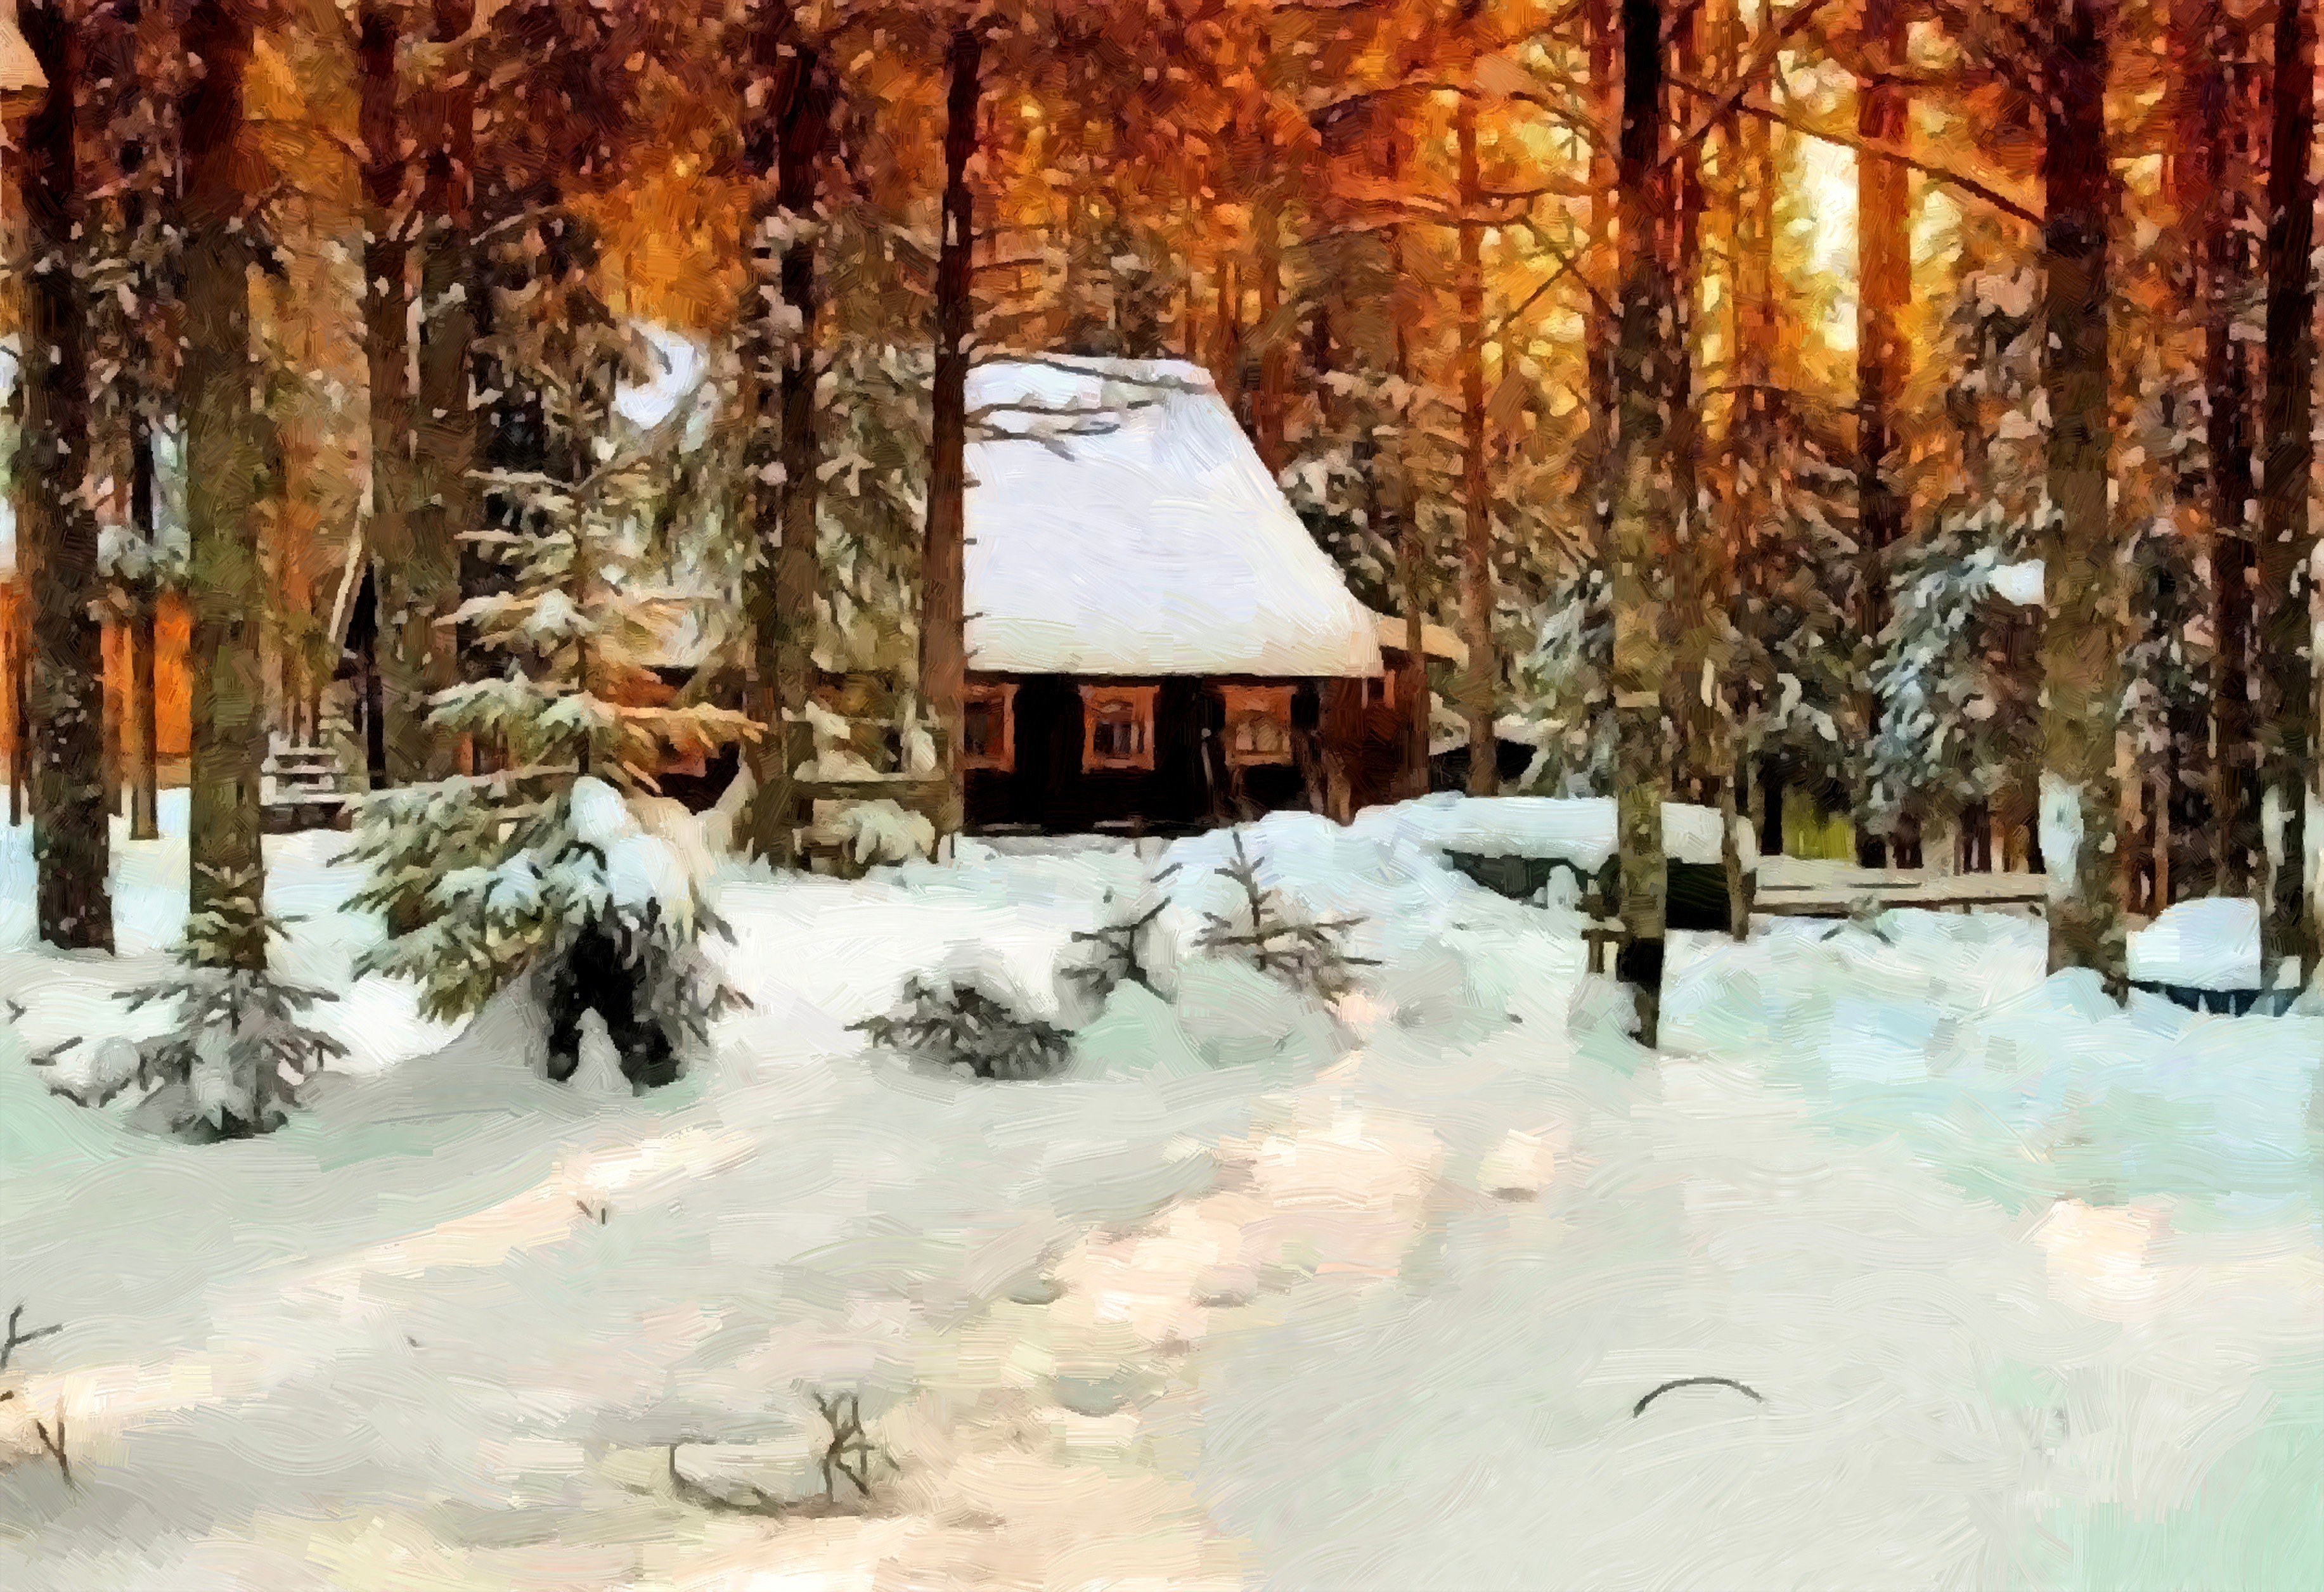 snow winter painting forest oil canvas trees wallpapers nature wallhaven desktop russian artwork backgrounds cabin screen von zima similar chevron